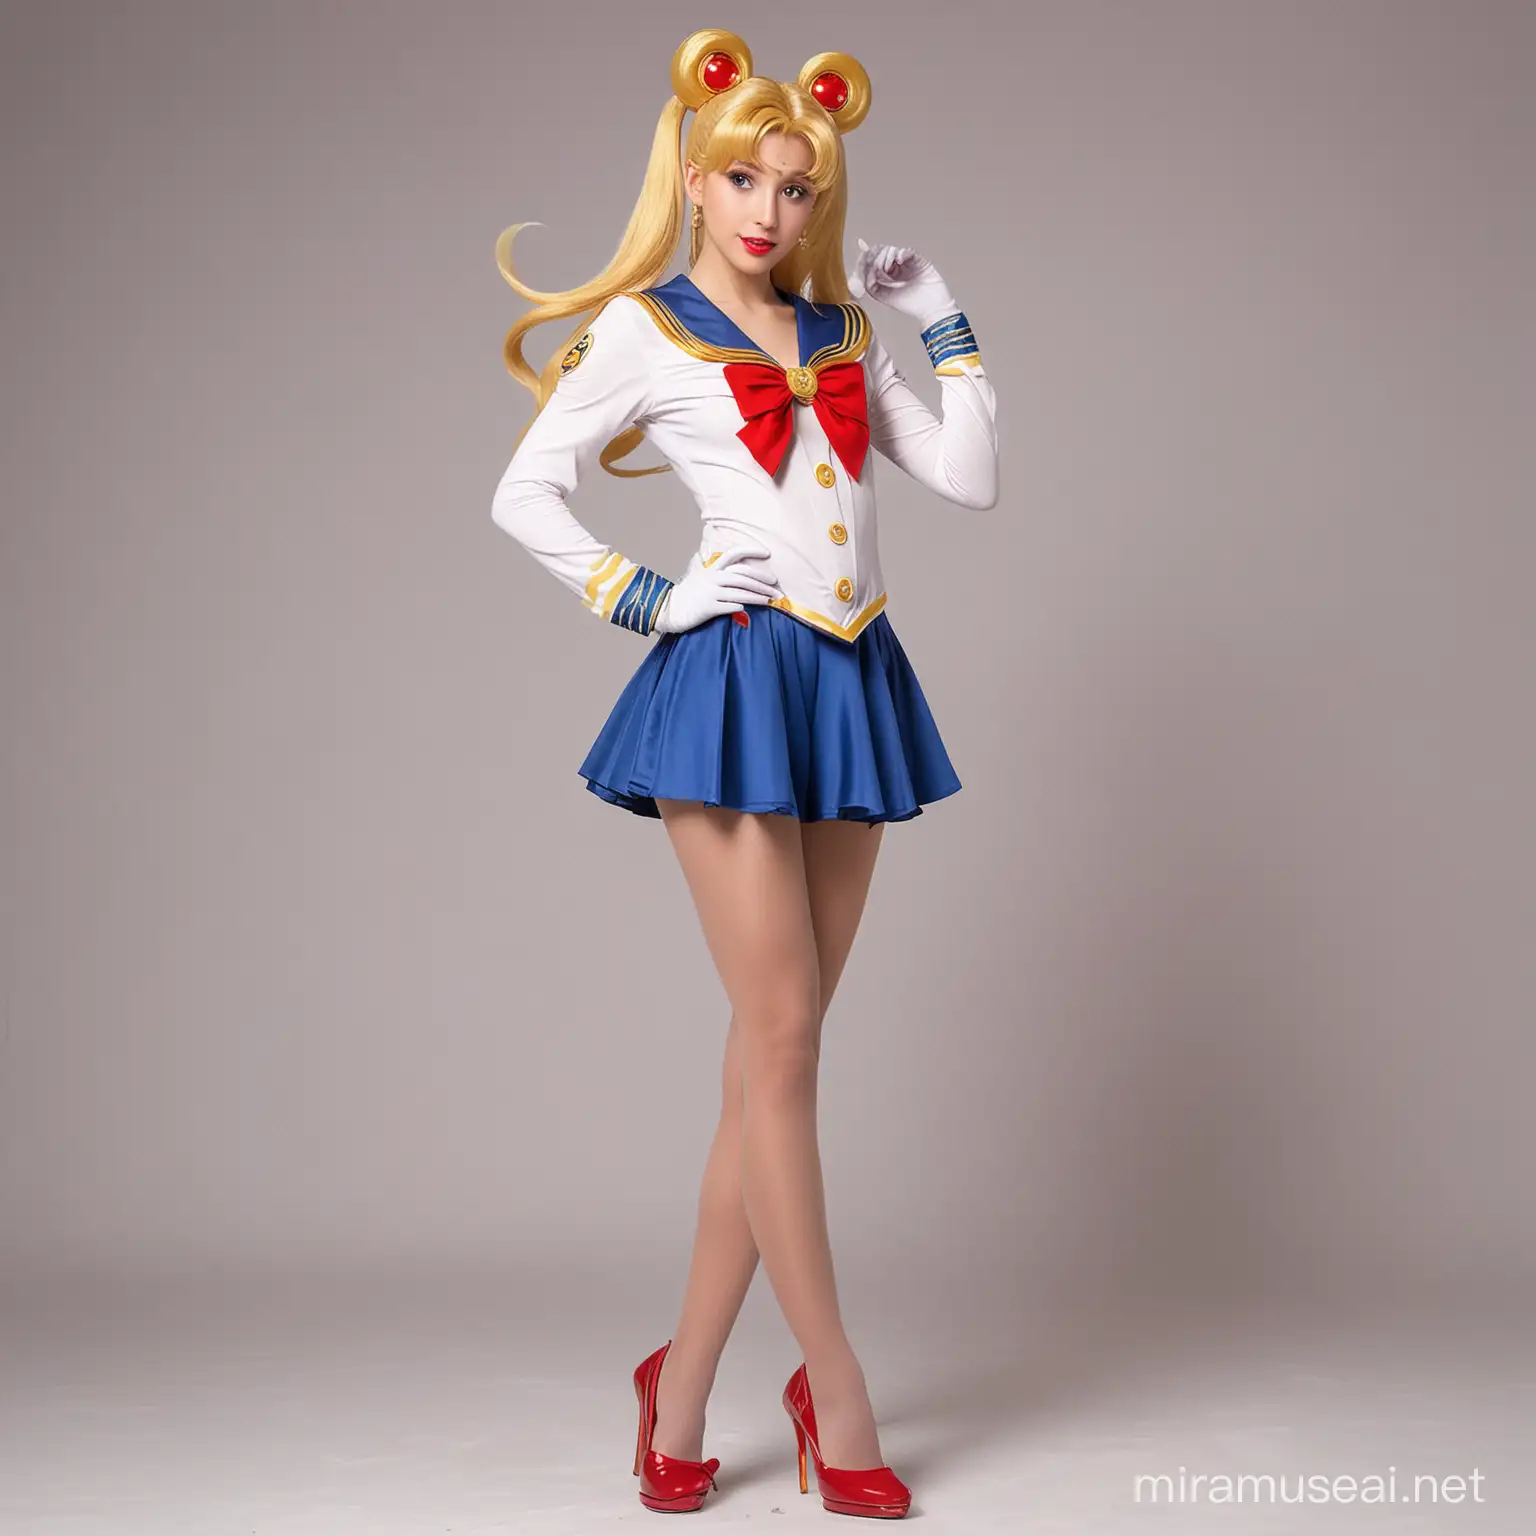 real sailor moon girl full body image,  posing in pantyhose and high heels